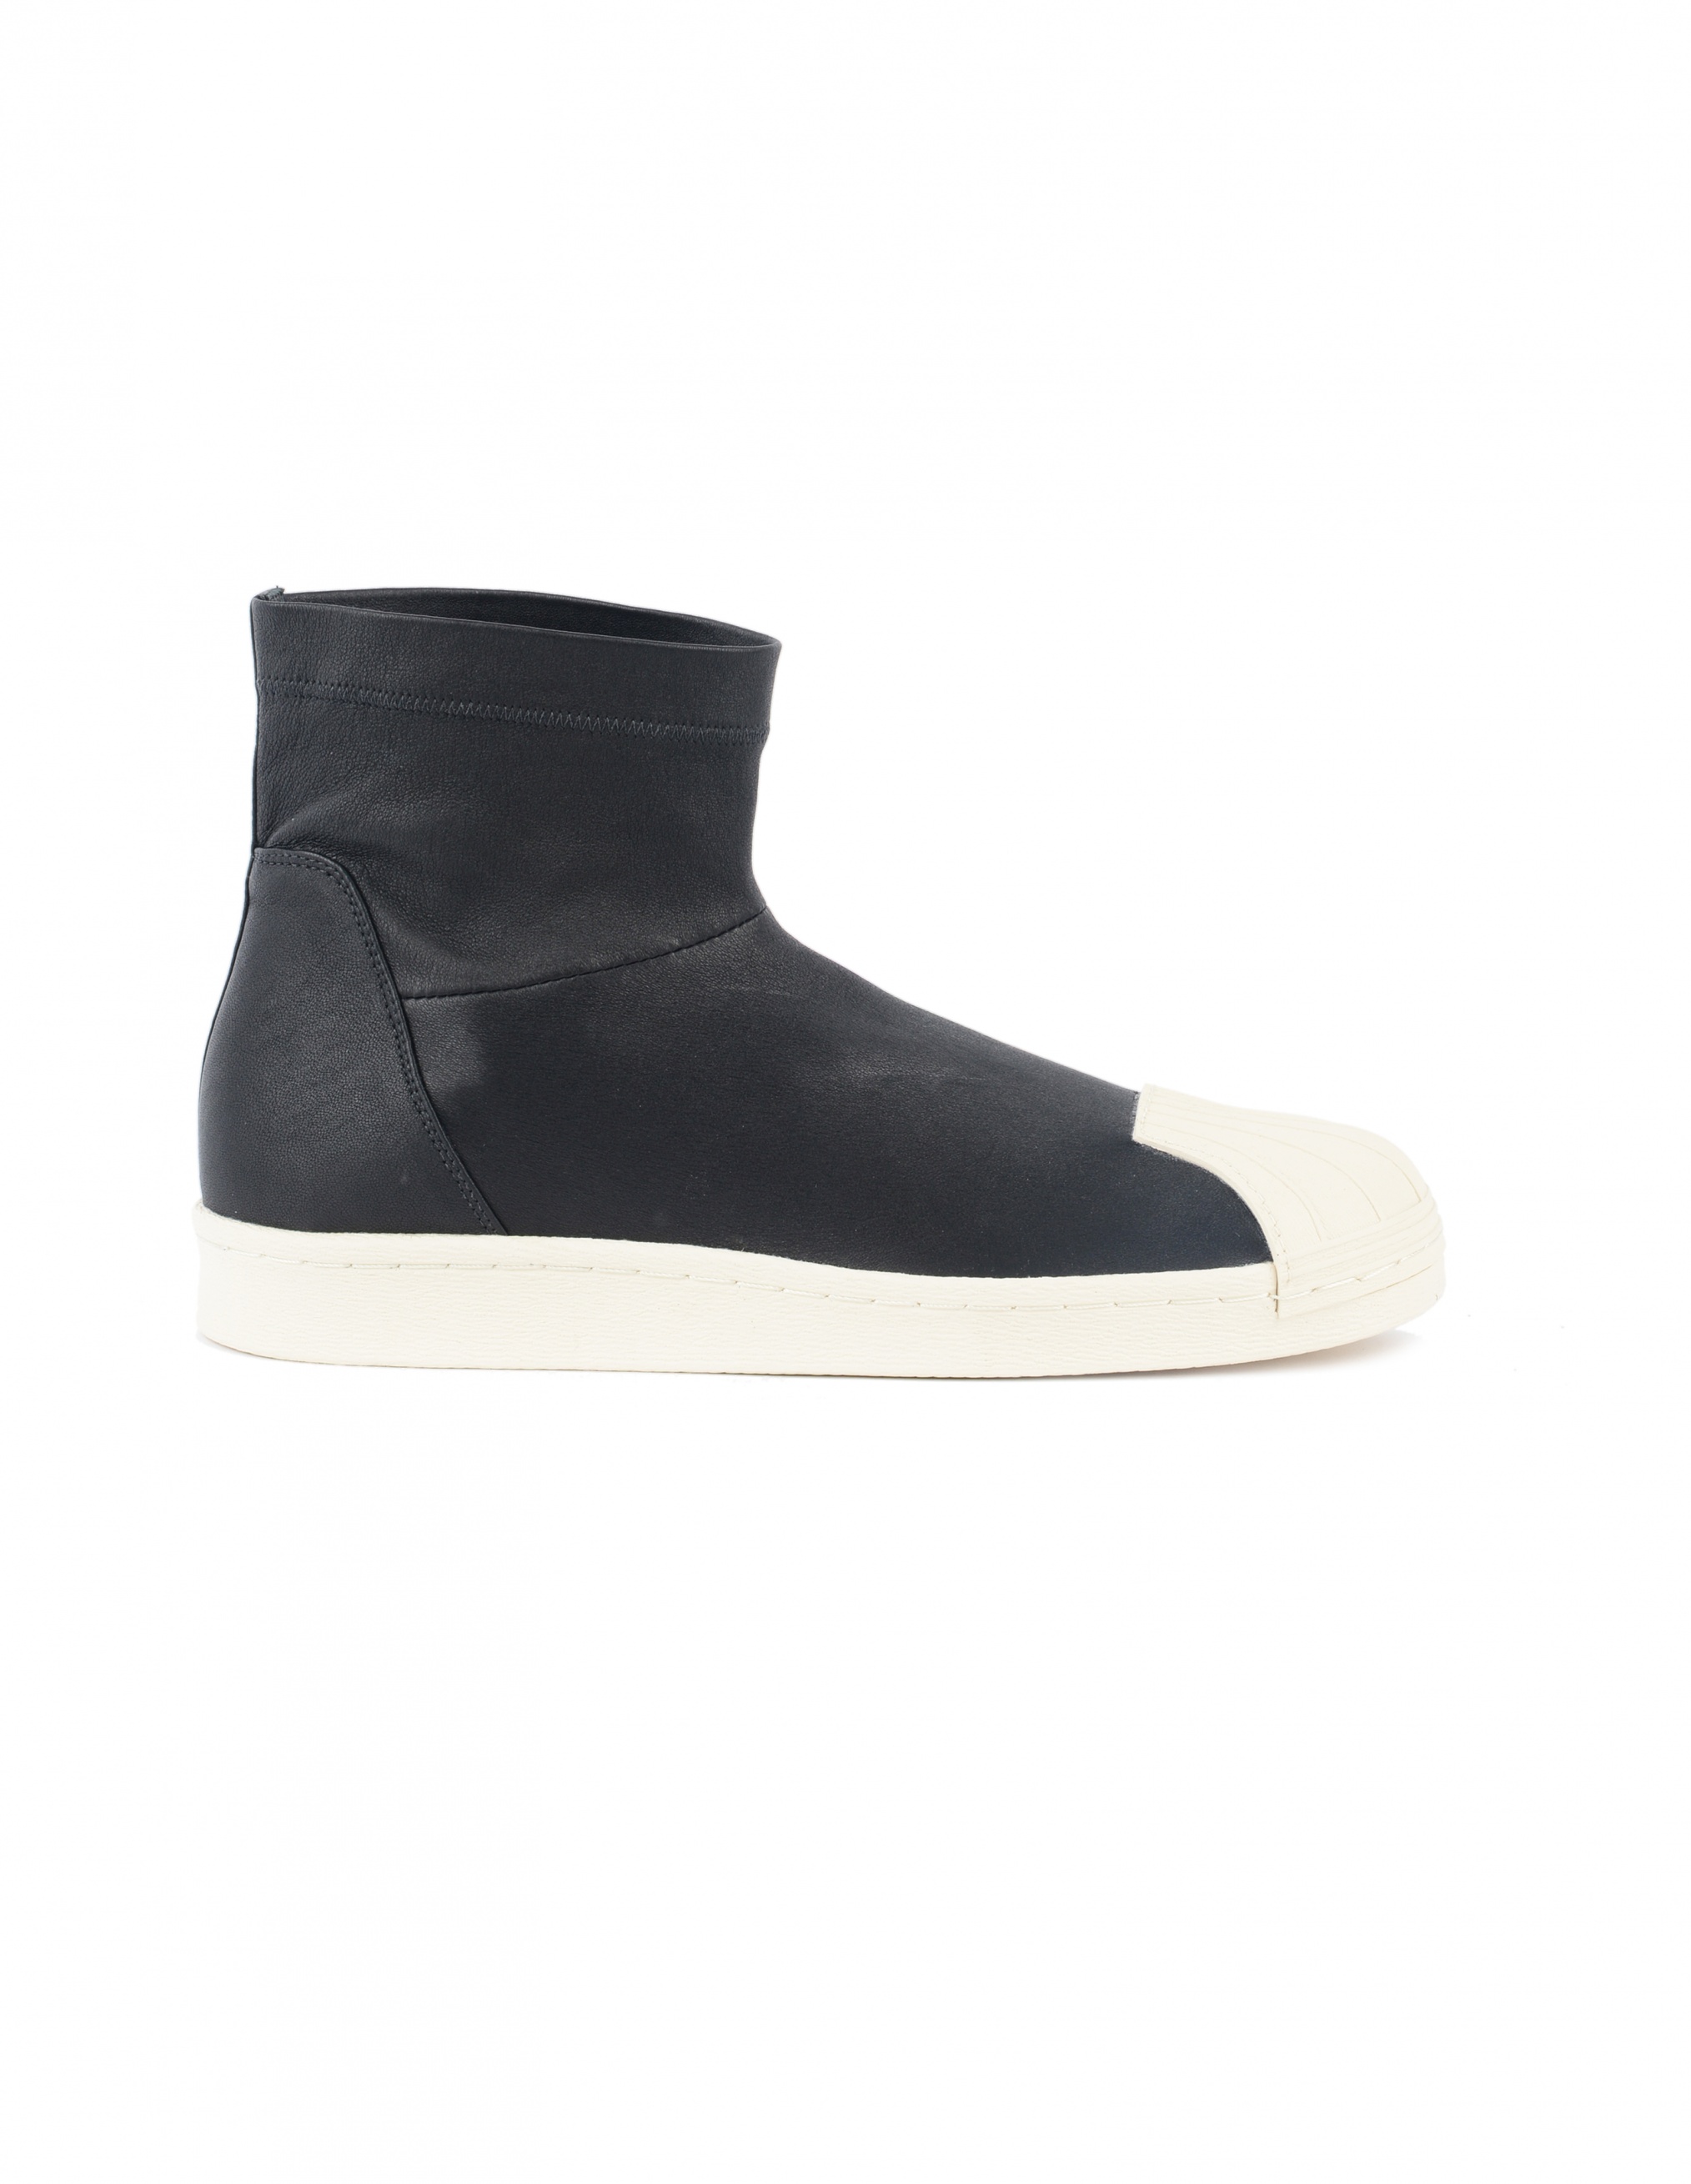 adidas x rick owens superstar ankle boot